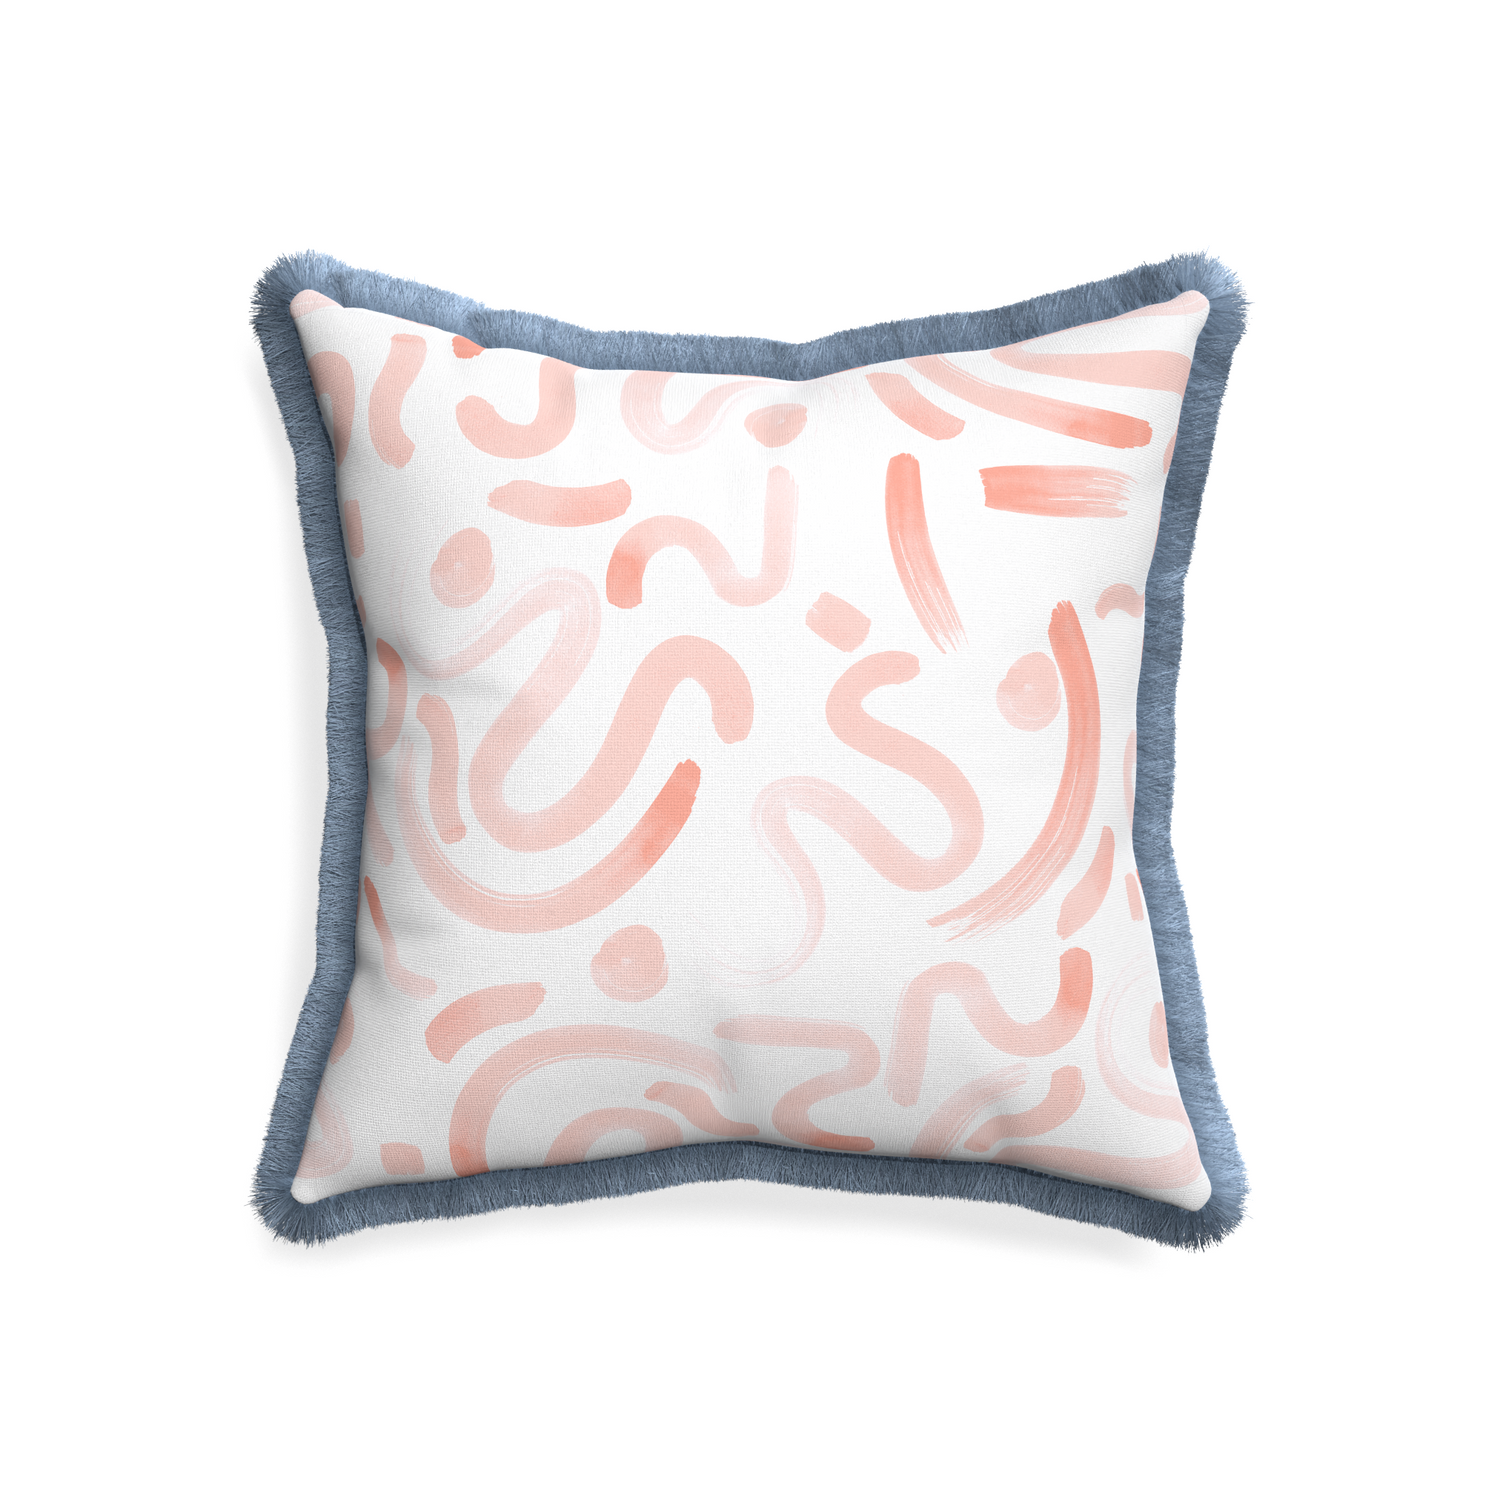 20-square hockney pink custom pink graphicpillow with sky fringe on white background